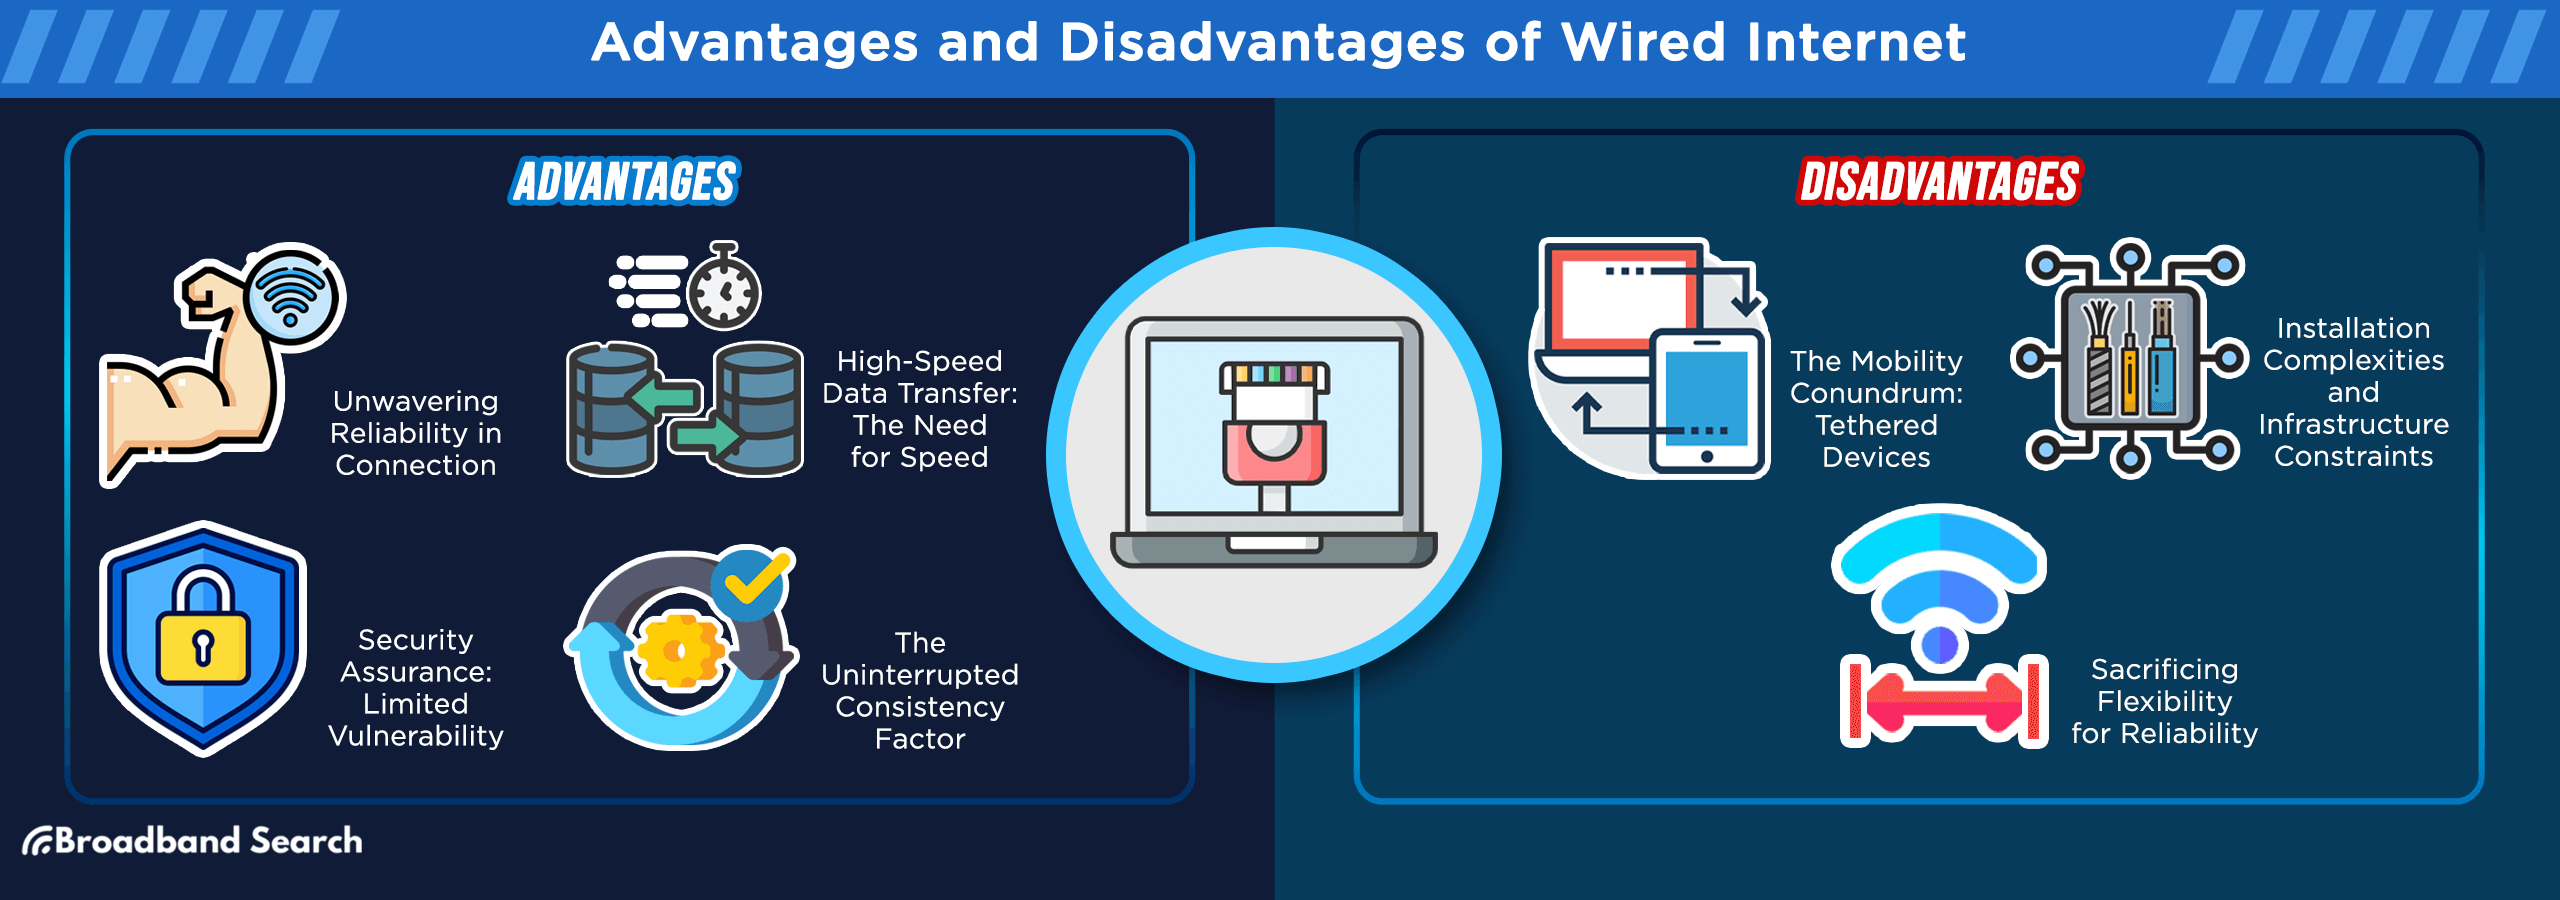 Advantages and disadvantages of Wired Internet